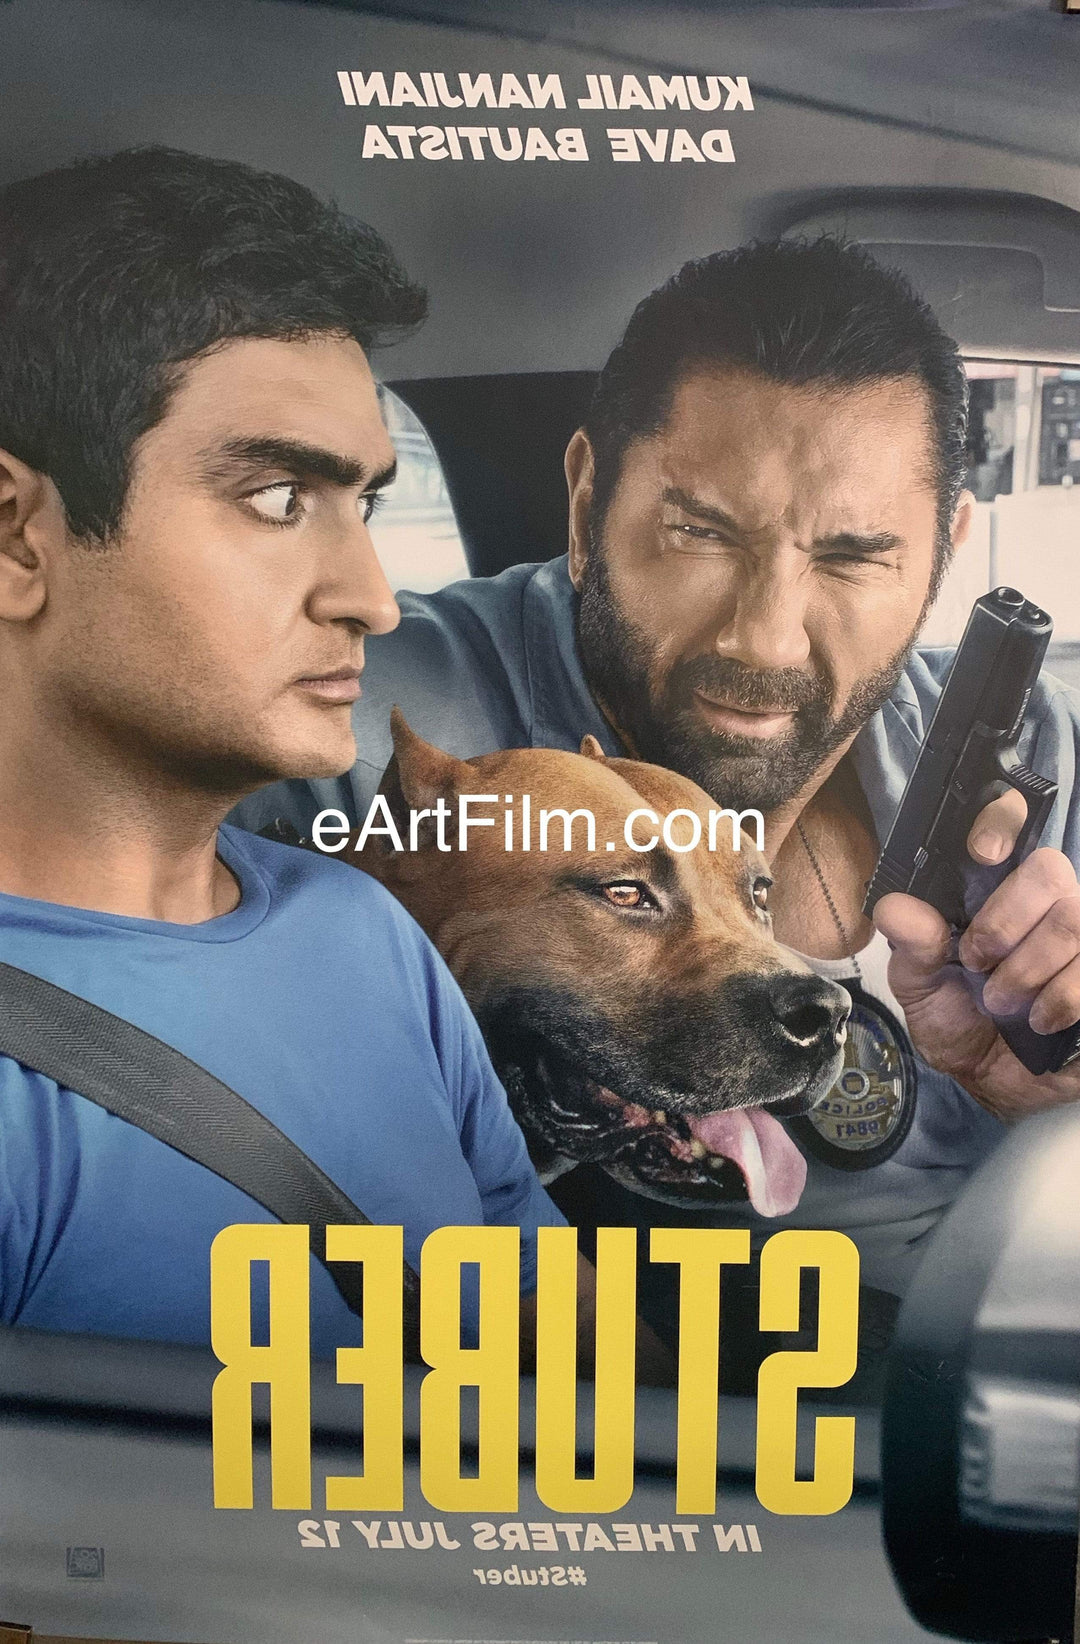 eArtFilm.com U.S One Sheet (27"x40") Double Sided Stuber original movie poster Style A 2019 27x40 DS Action comedy Dave Bautista